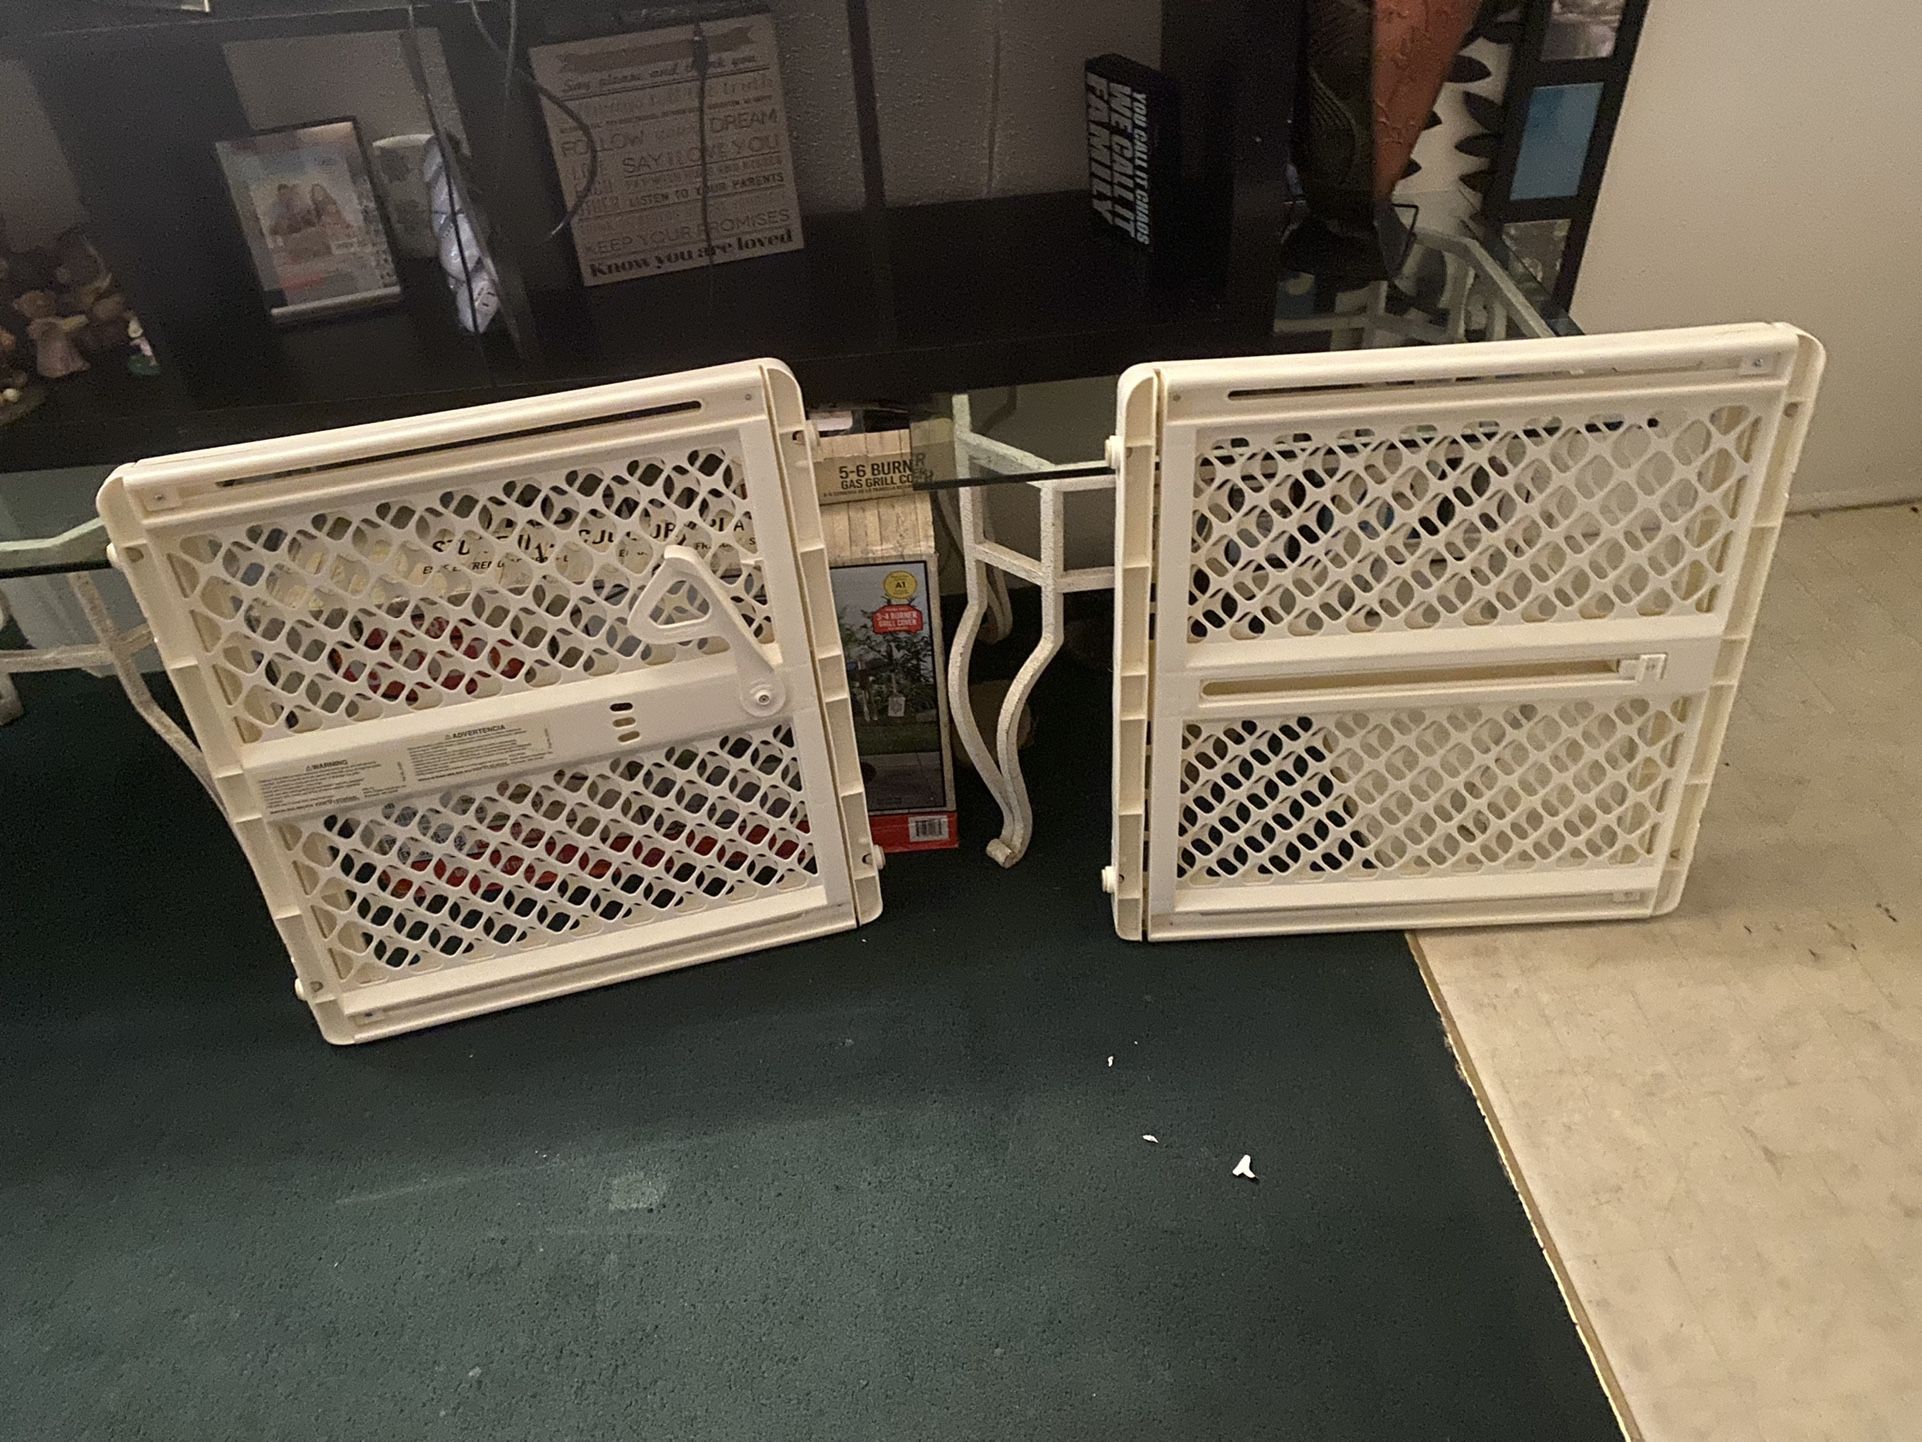 $40- 2 baby gates Sold together as a set only. Approx 2’ tall by 2’ wide before opening gate.